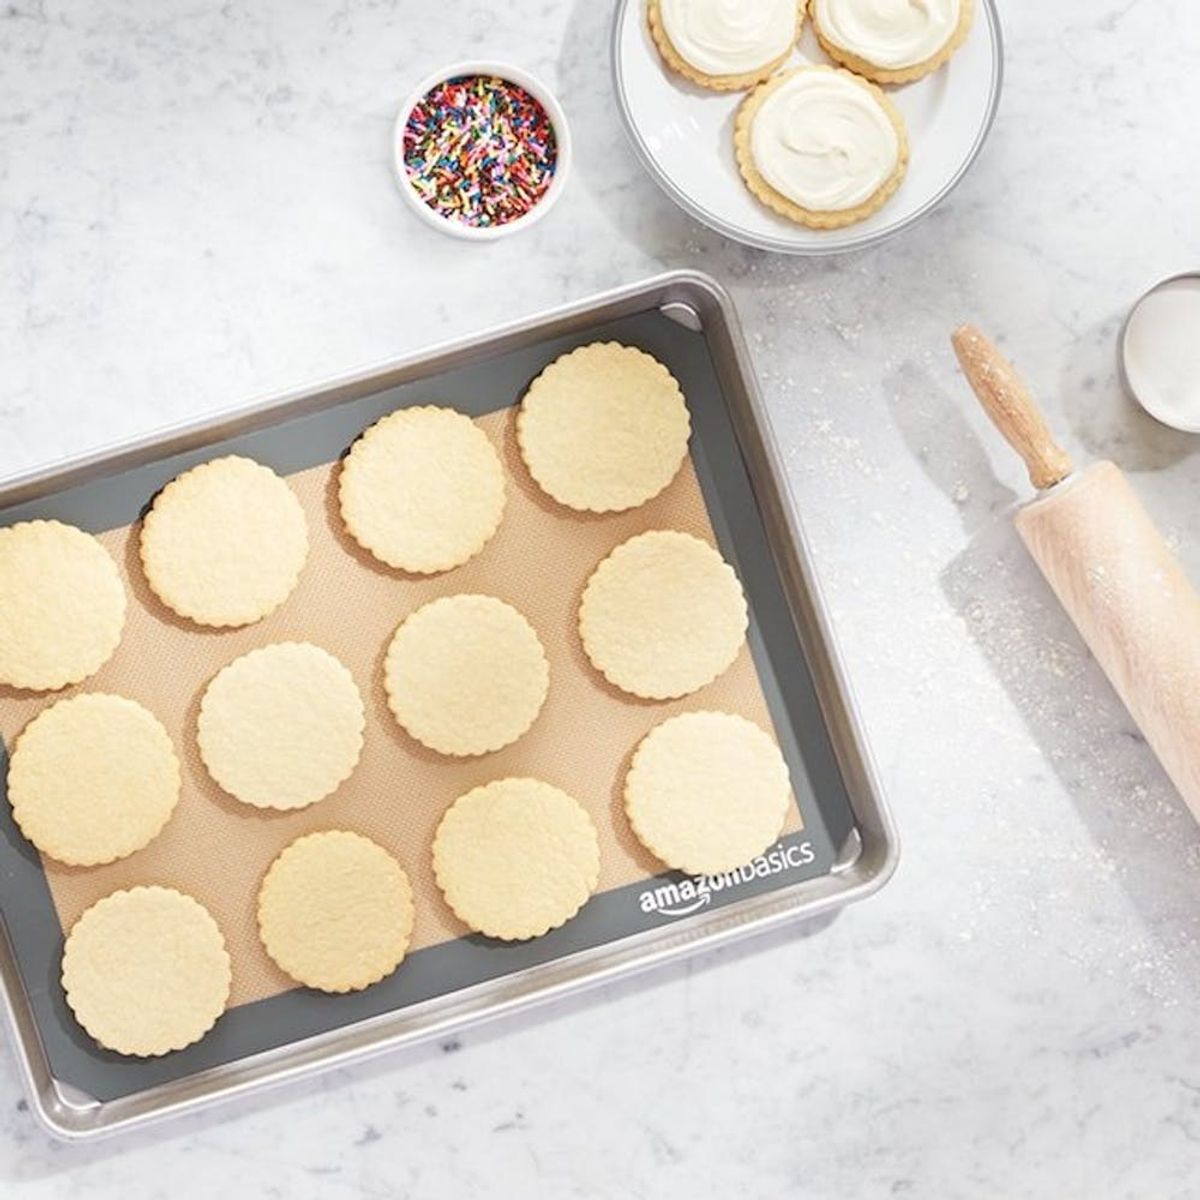 13 Best Baking Gadgets for the Betty Crocker in Your Life